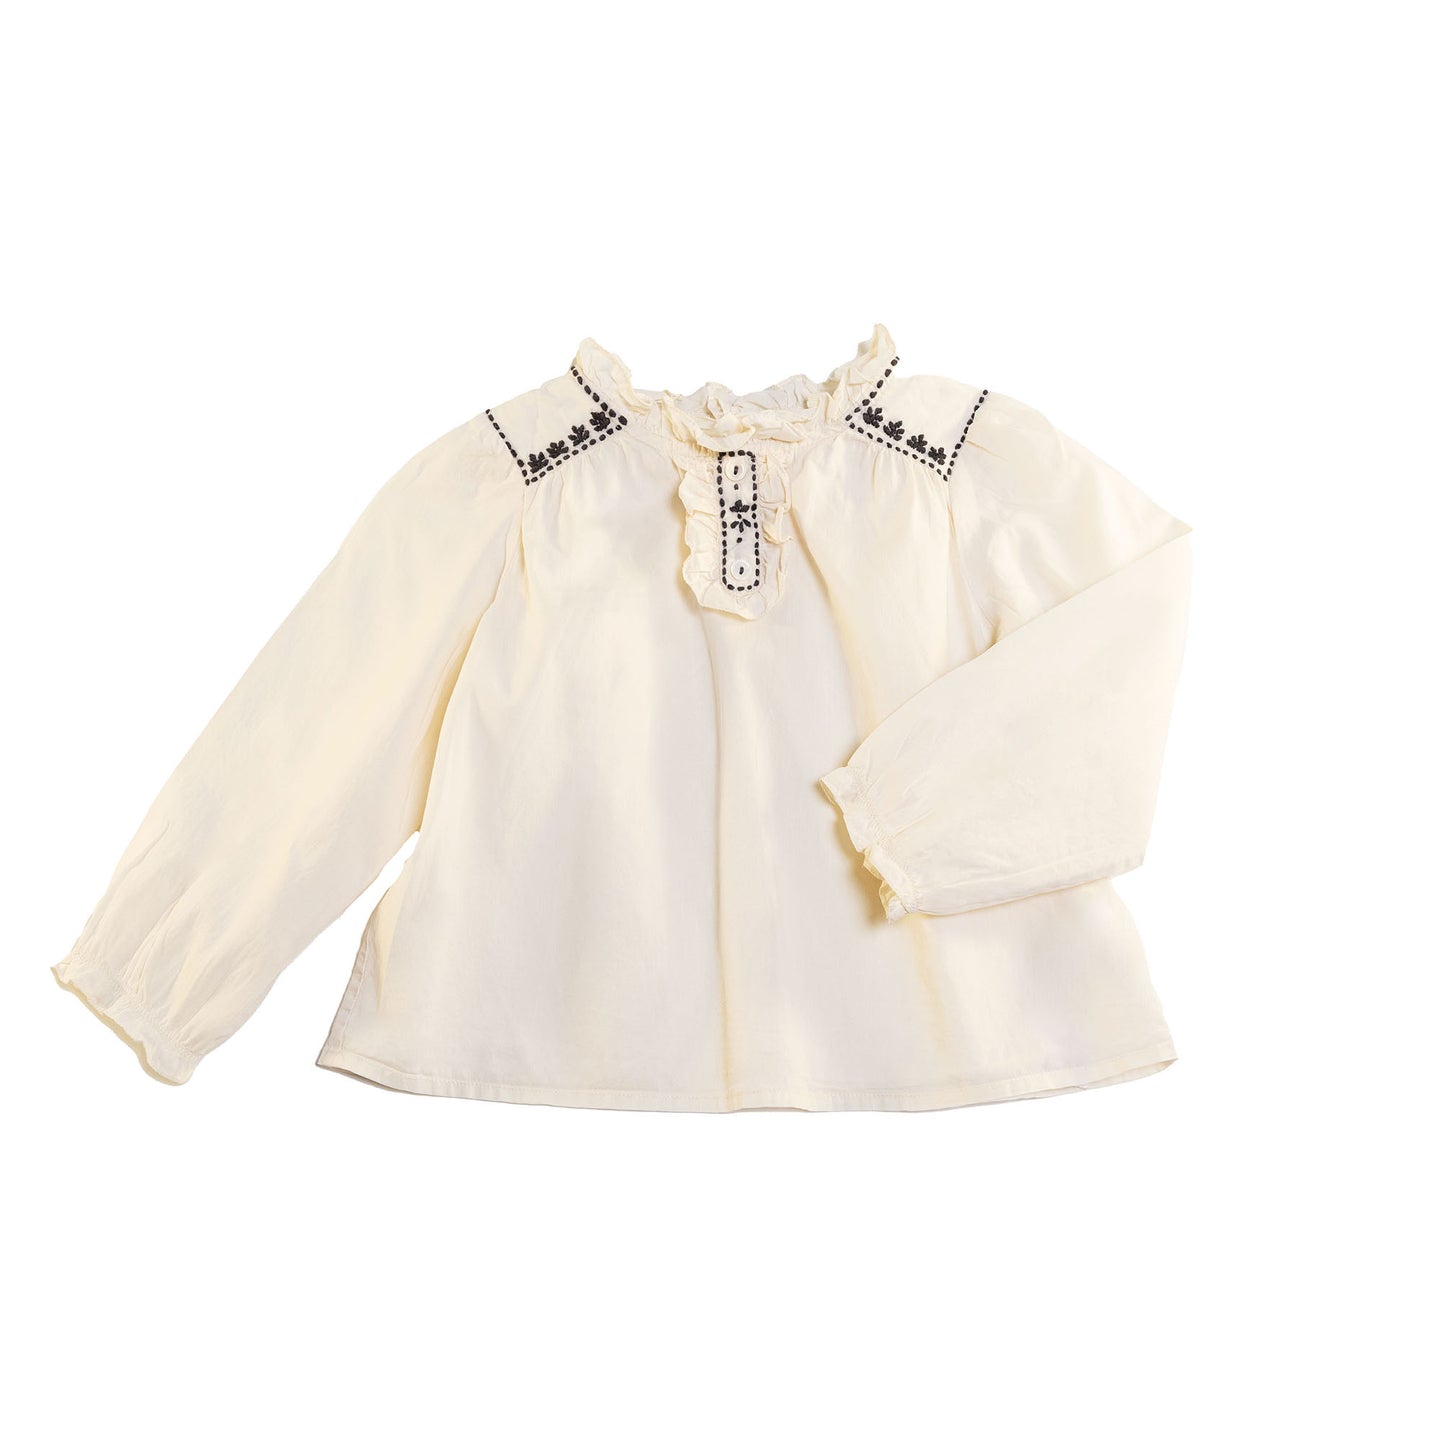 [18-24m] Bonpoint Baby Ruffle Collar LS White W/Black Embroidery Blouse